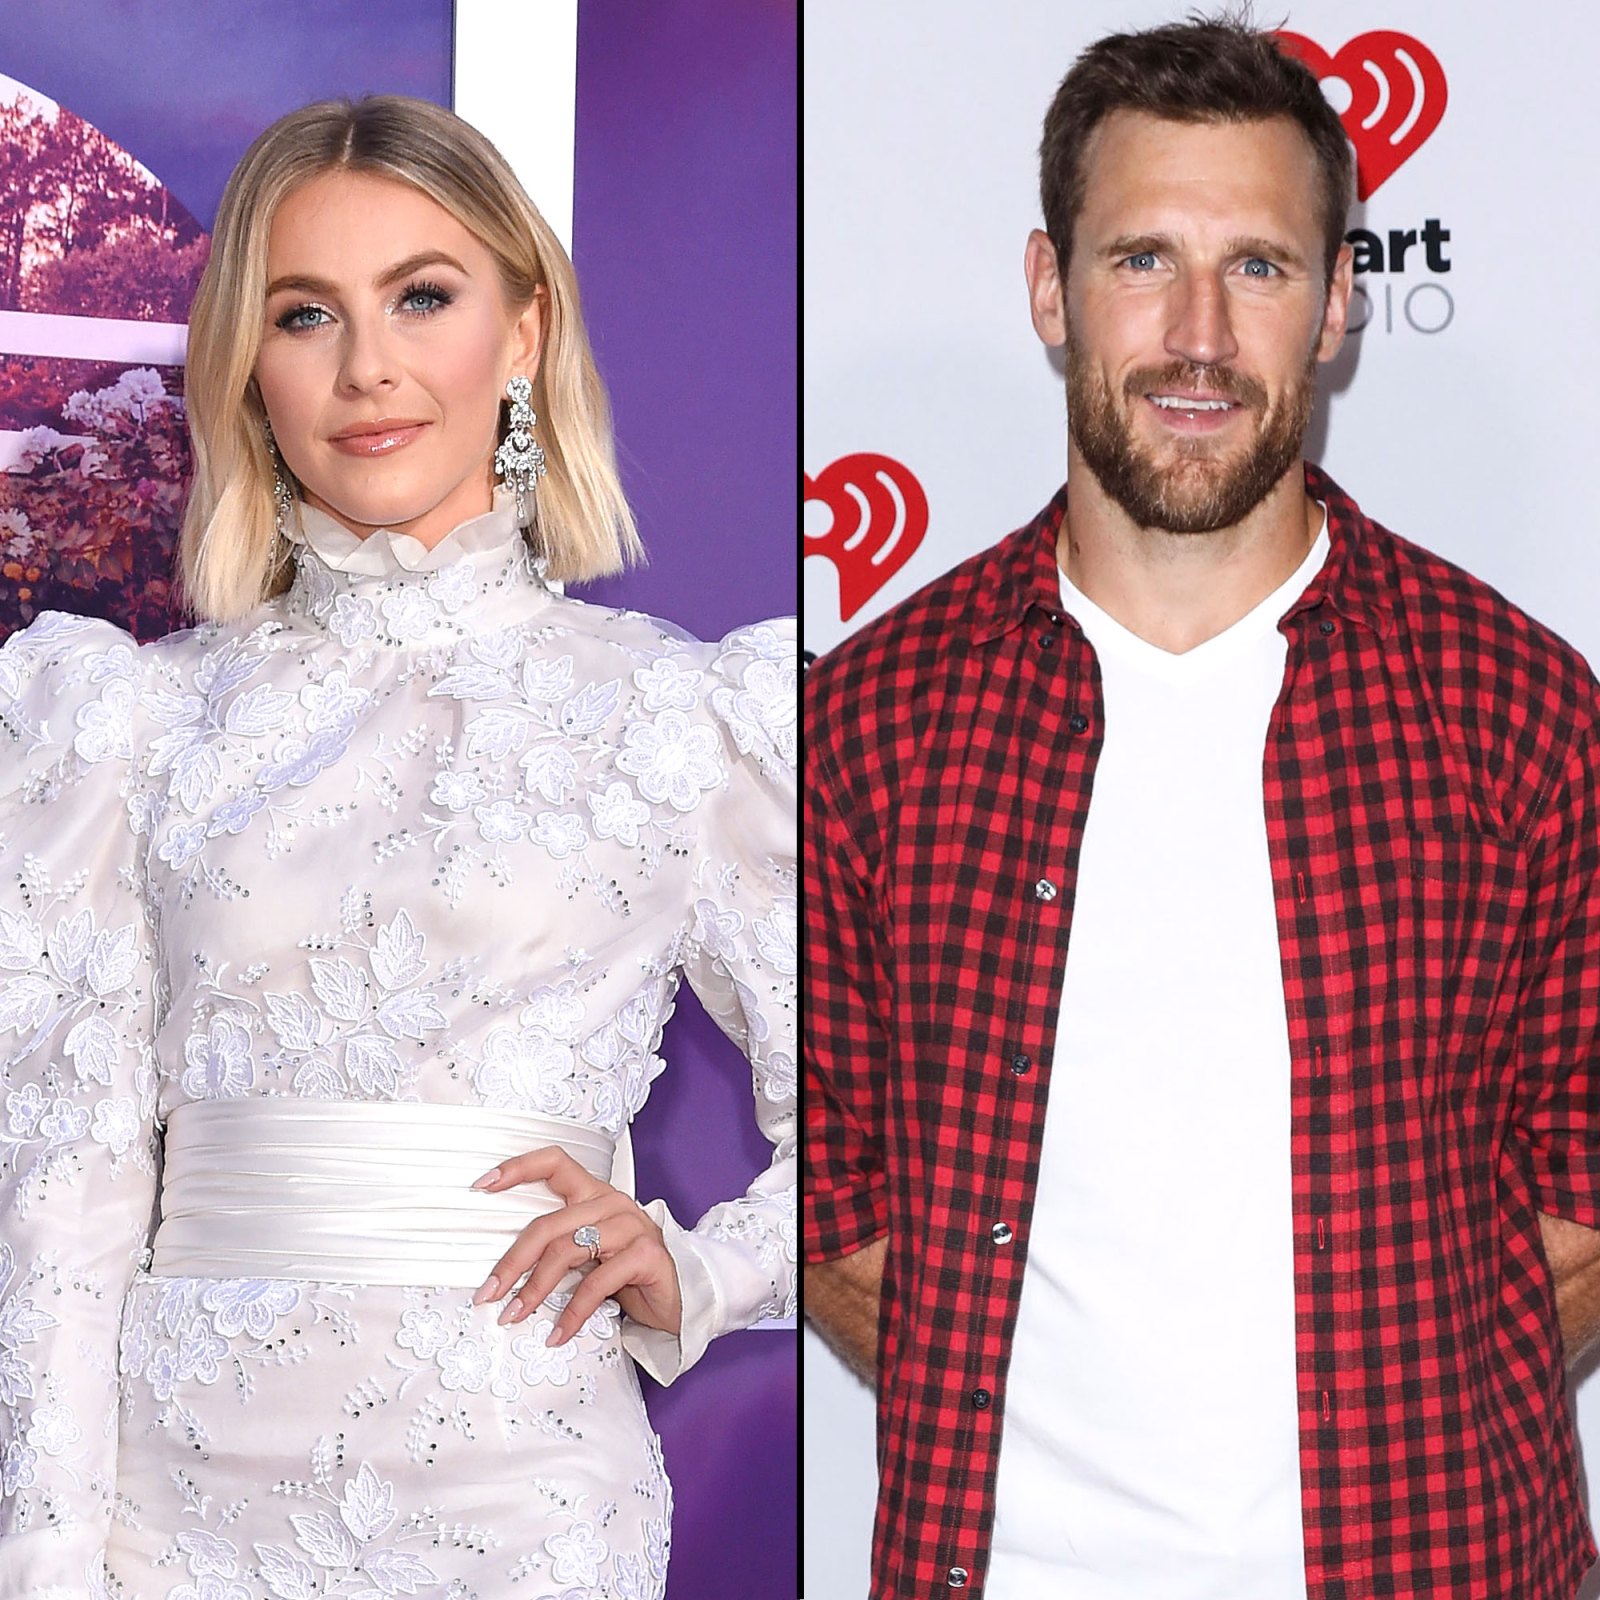 Julianne Hough and Brooks Laich Signs They Were Headed for a Split